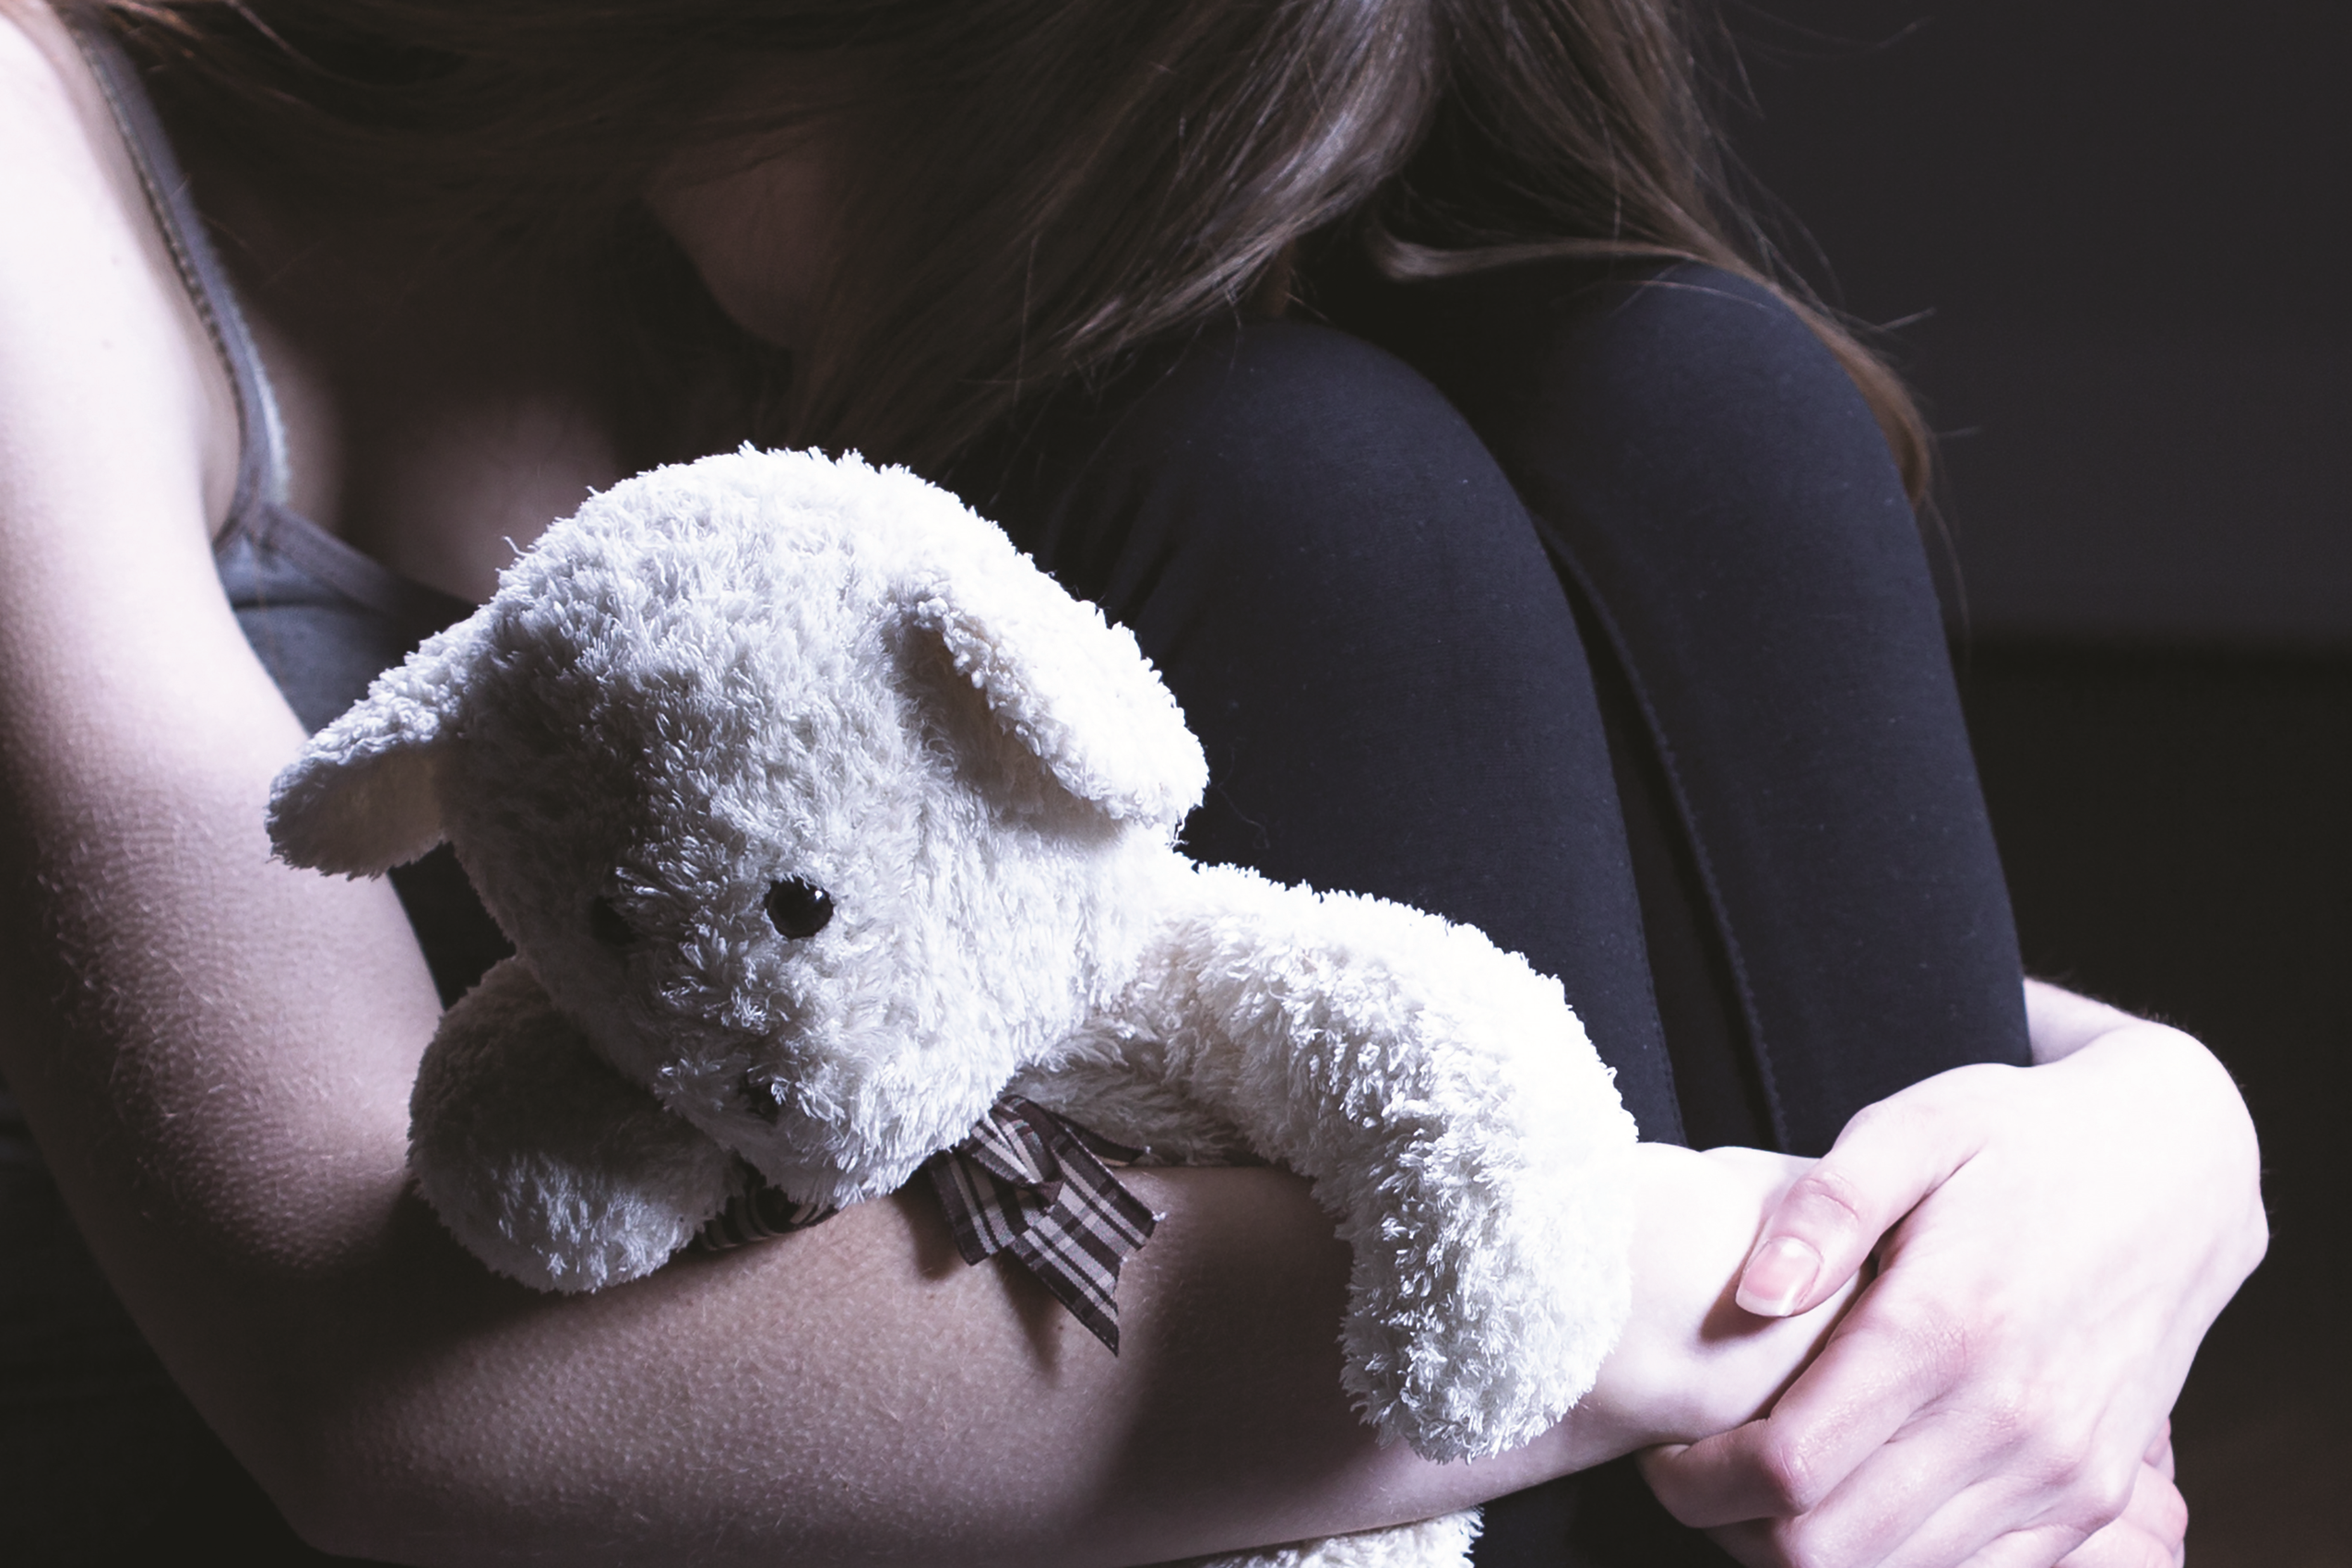 How to recognise and respond to potential child abuse and neglect - The  Pharmaceutical Journal